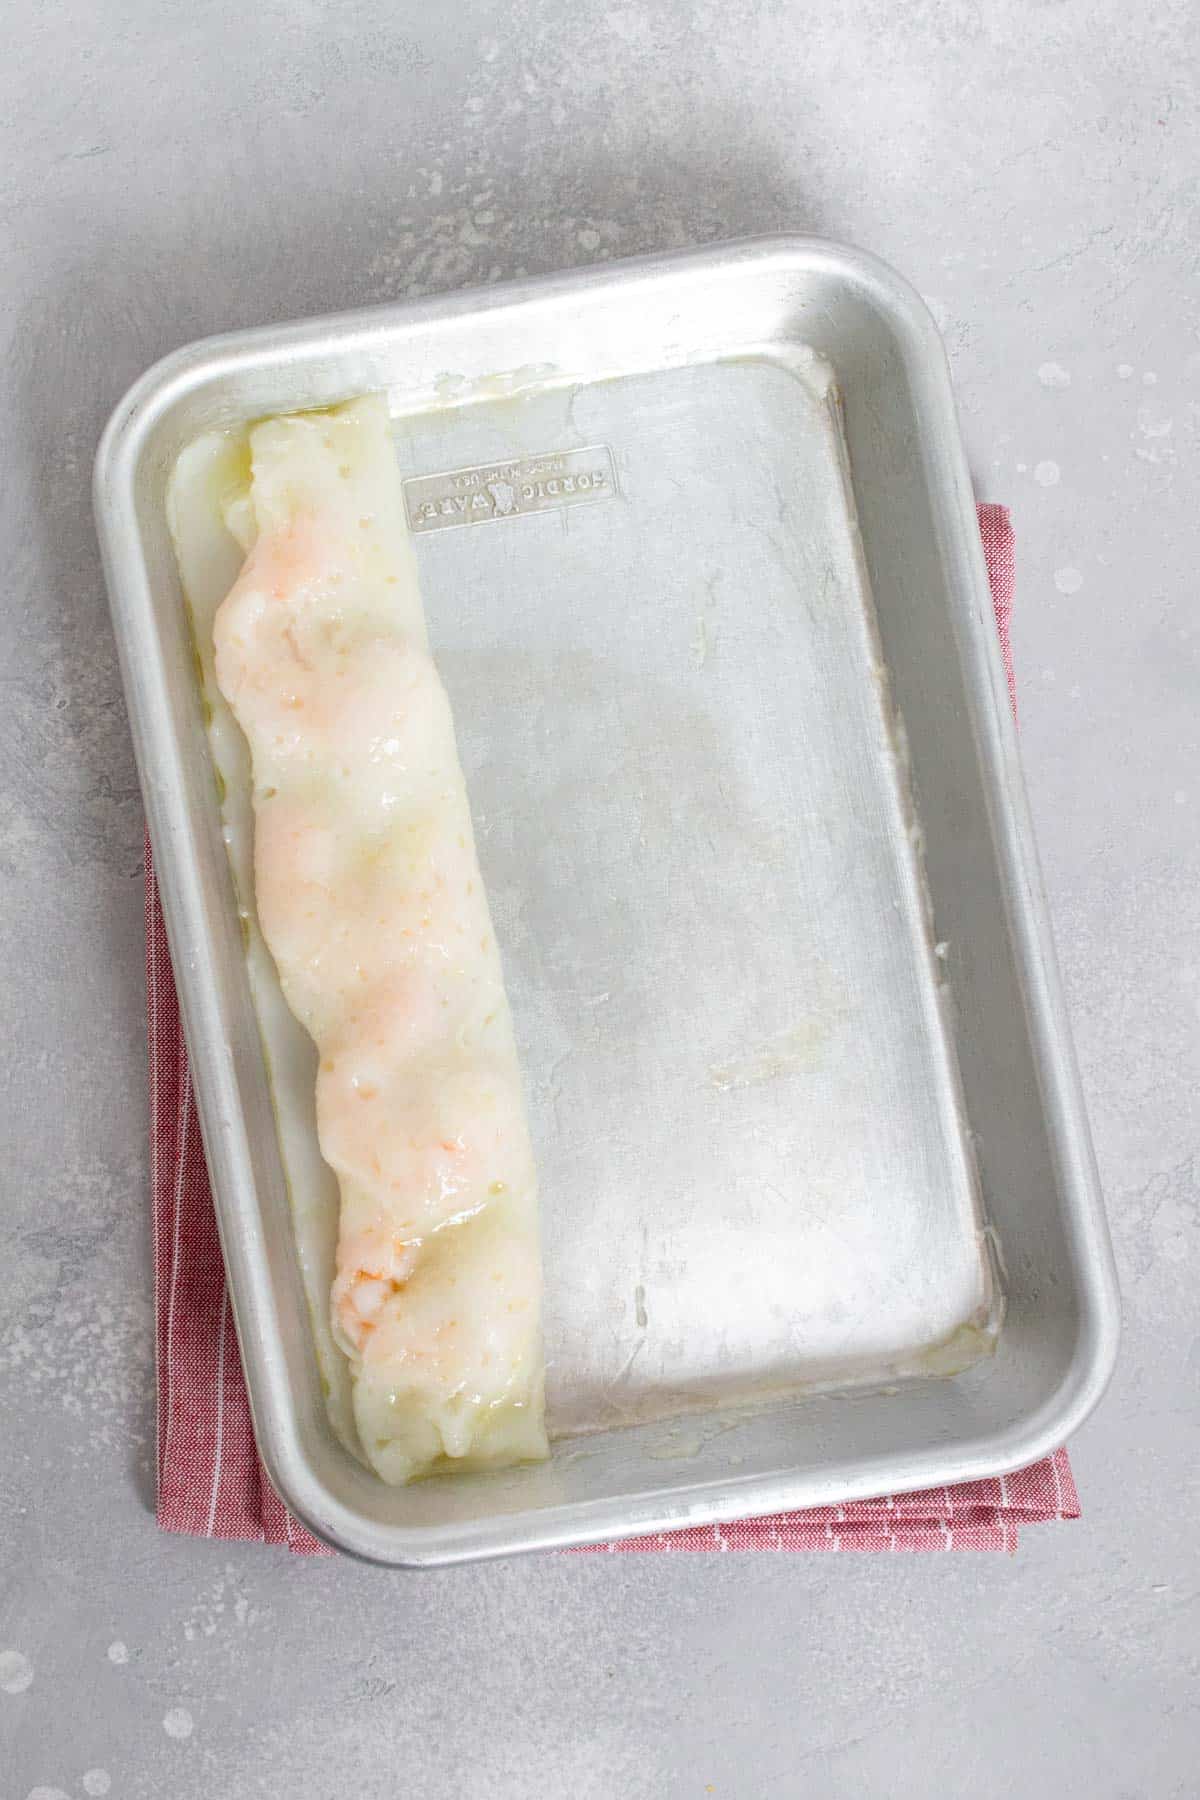 Cheung fun rolled up in a sheet pan.